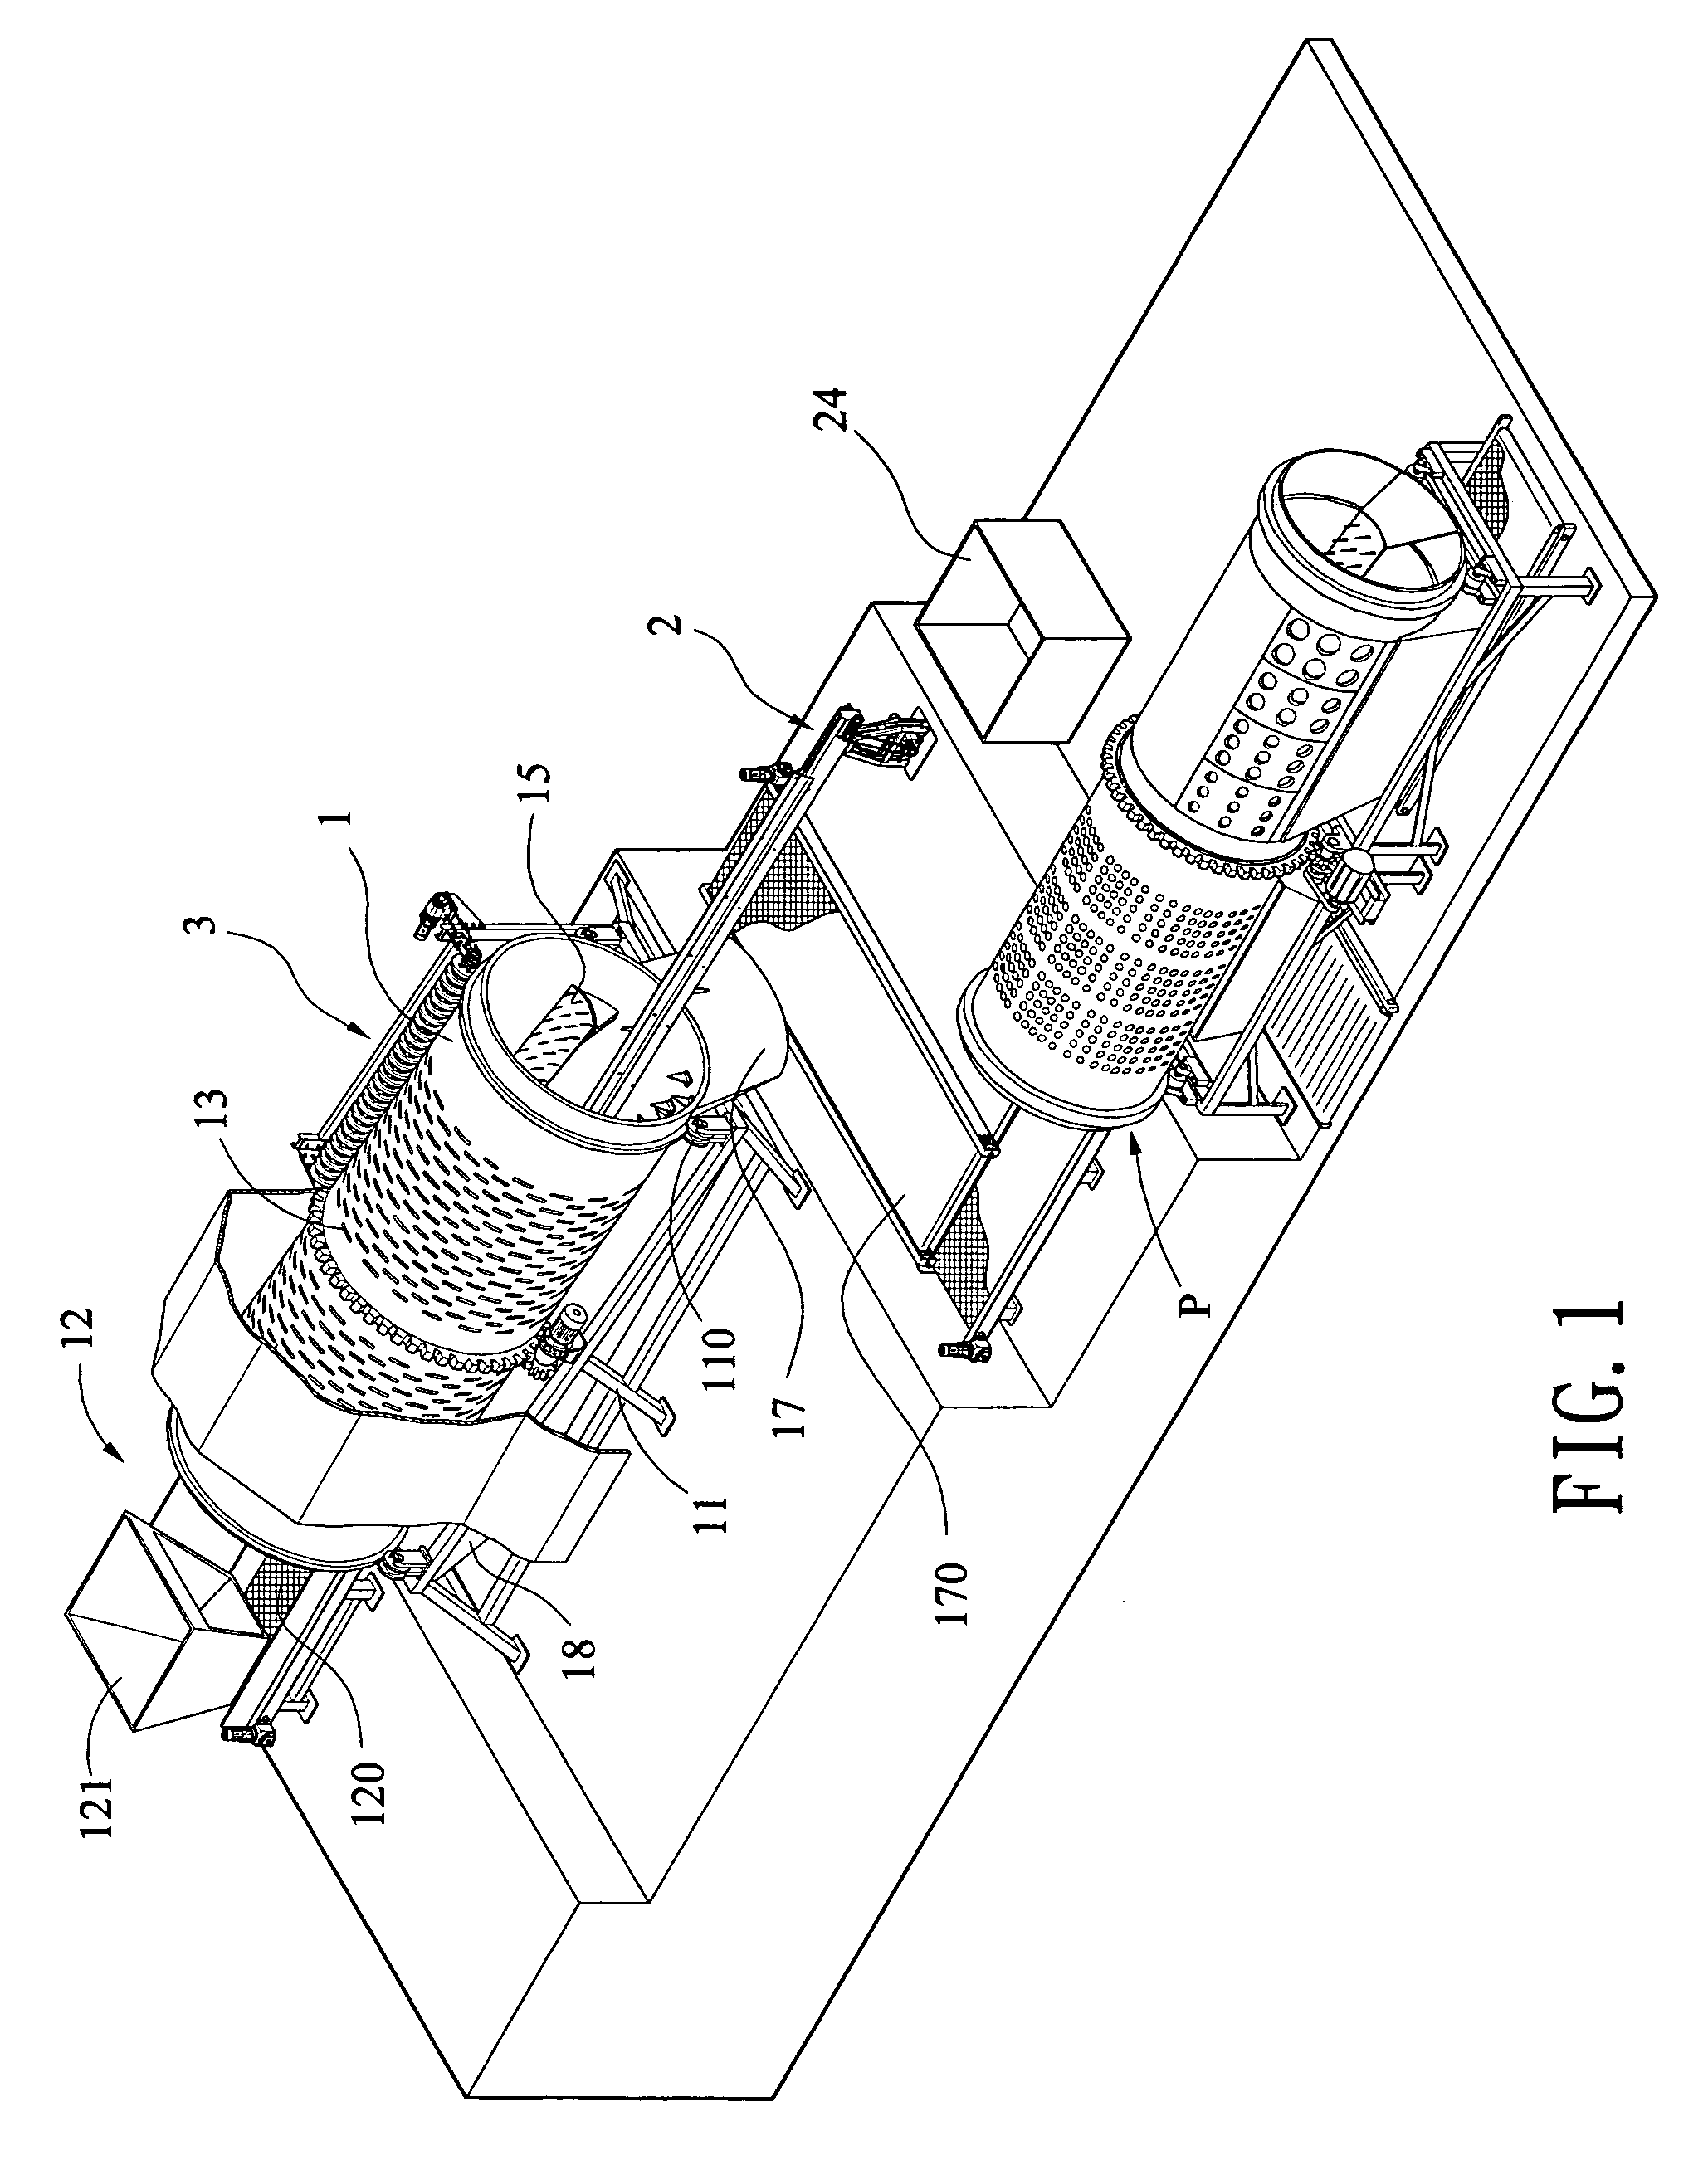 Apparatus for piercing garbage bags, washing materials released from the pierced garbage bags, and collecting nonrigid, elongate objects and powder